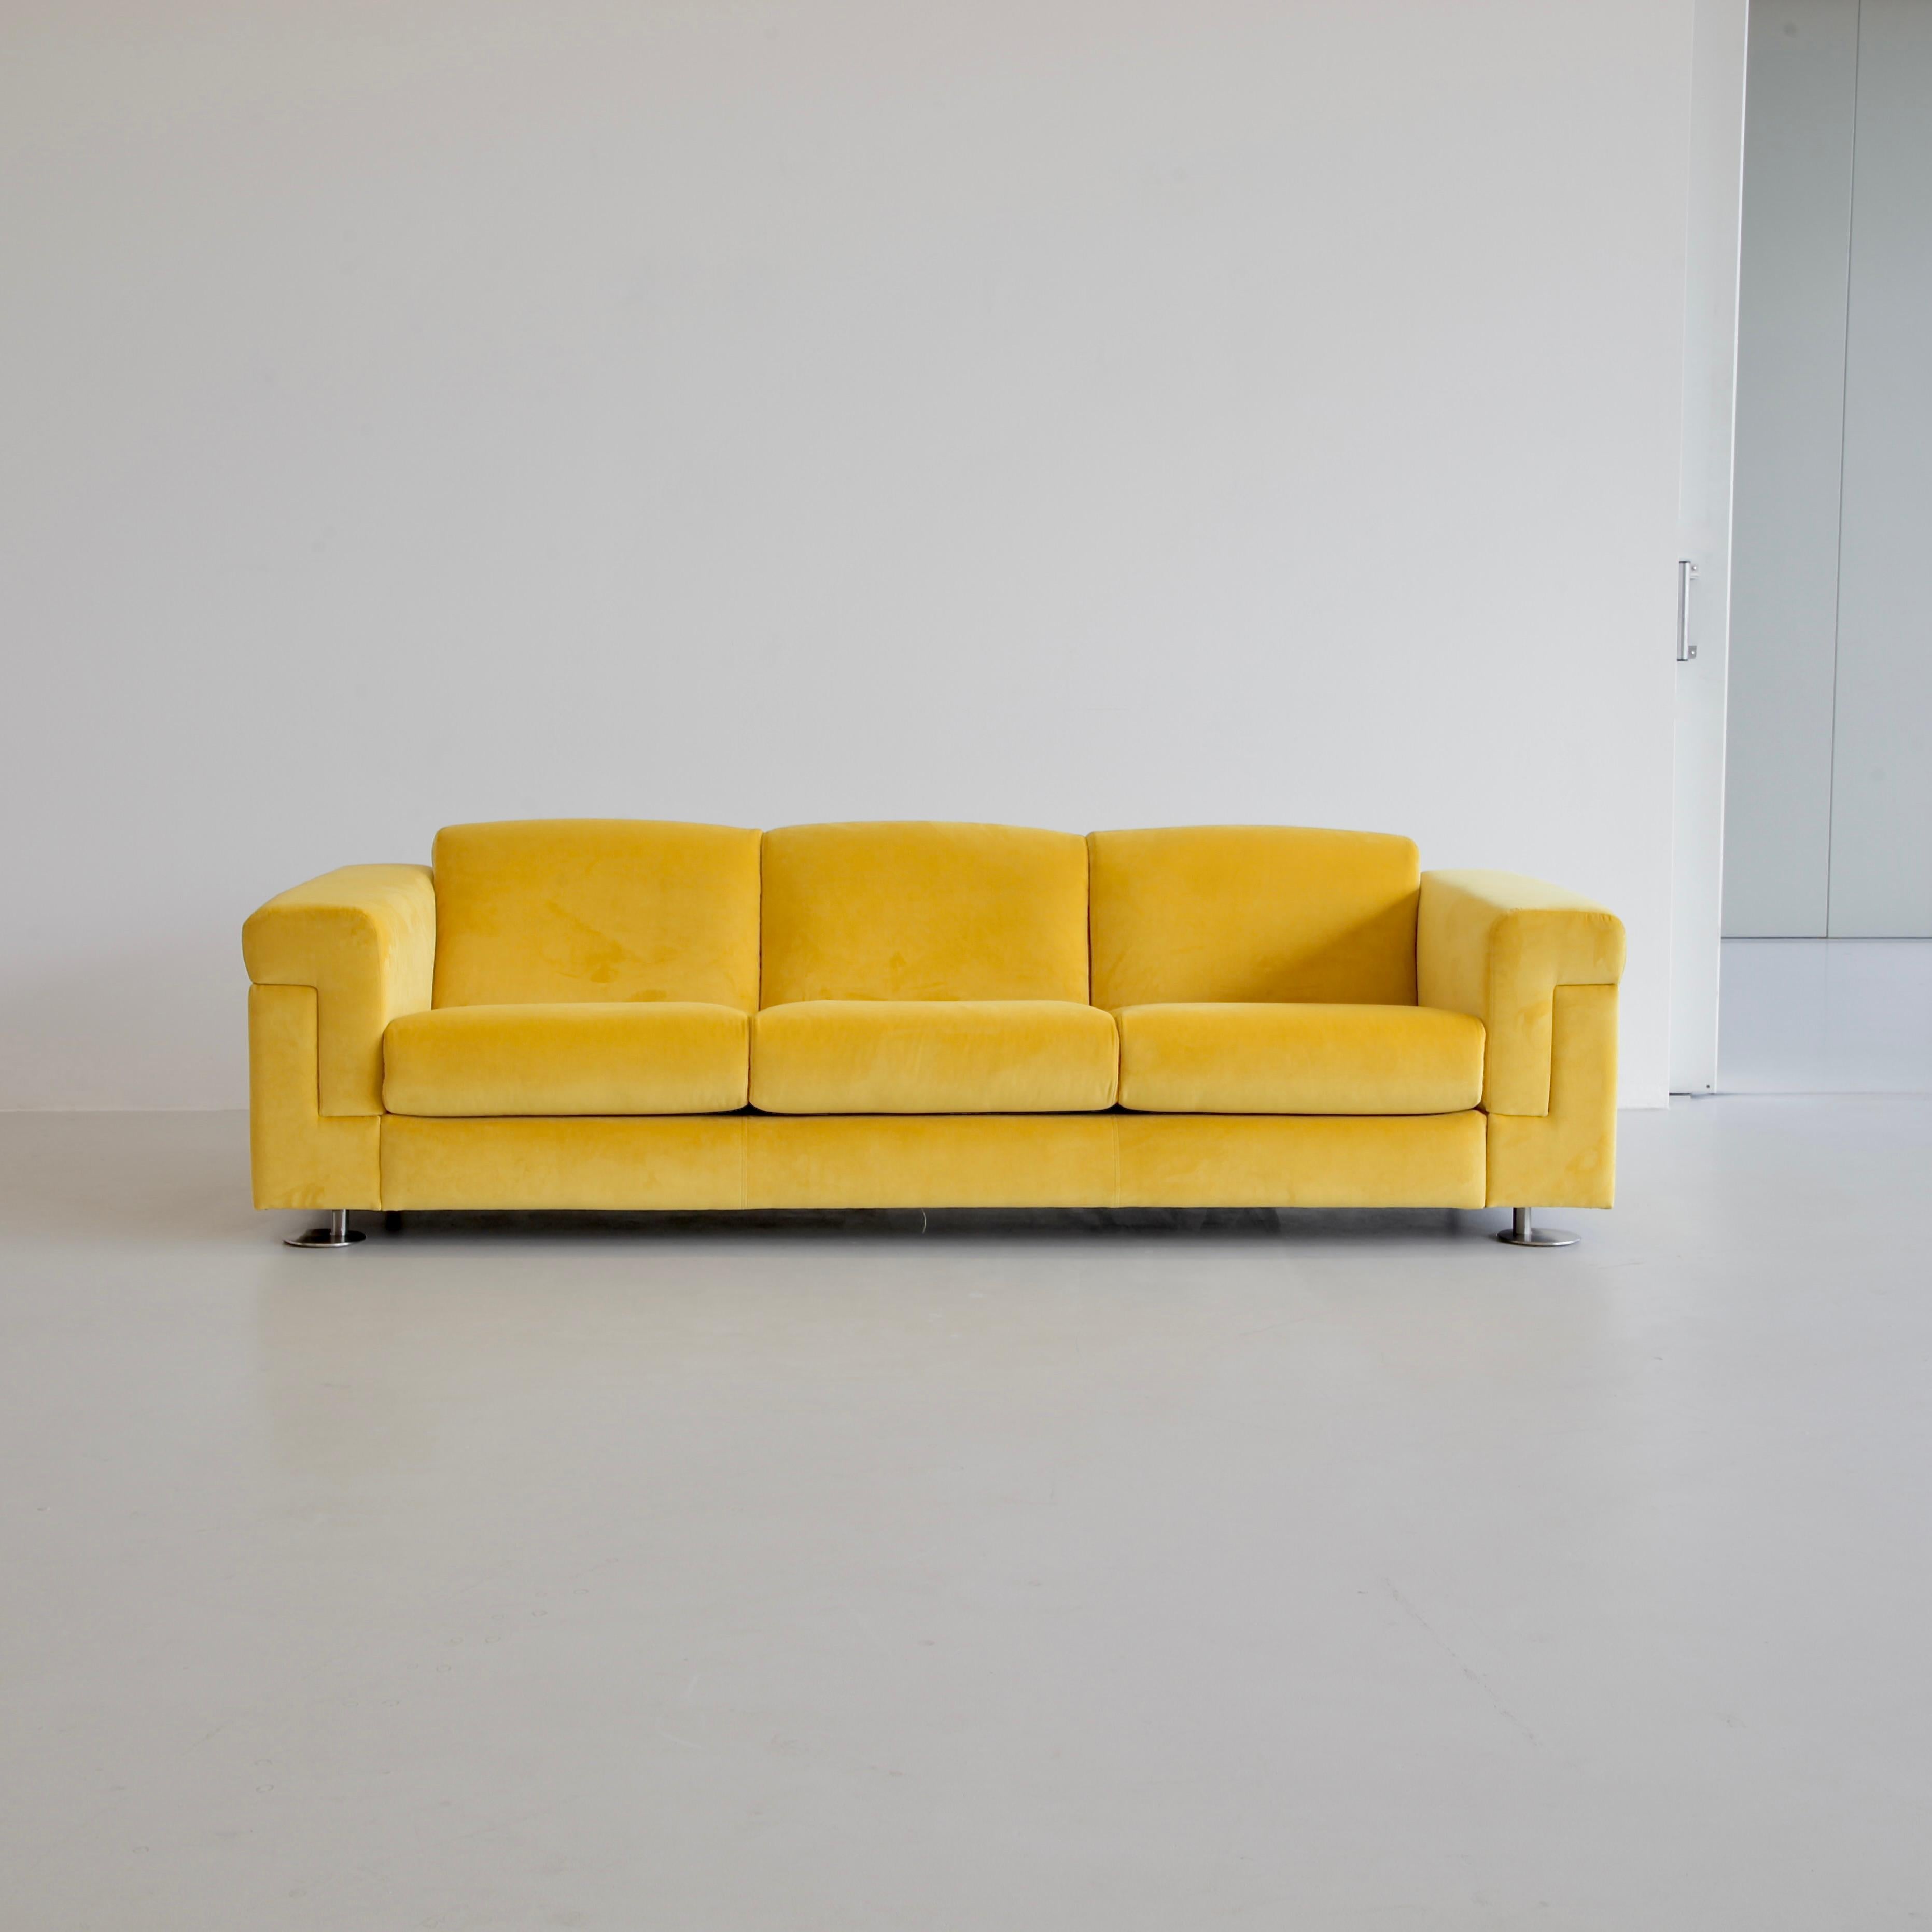 Three seat sofa designed by Valeria Borsani and Alfredo Bonetti. Italy, Tecno, 1966.

Large sofa upholstered in yellow velvet designed by Tecno's Borsani and Bonetti in 1966. Polished metal feet appear retracted inwards with respect to the centre of